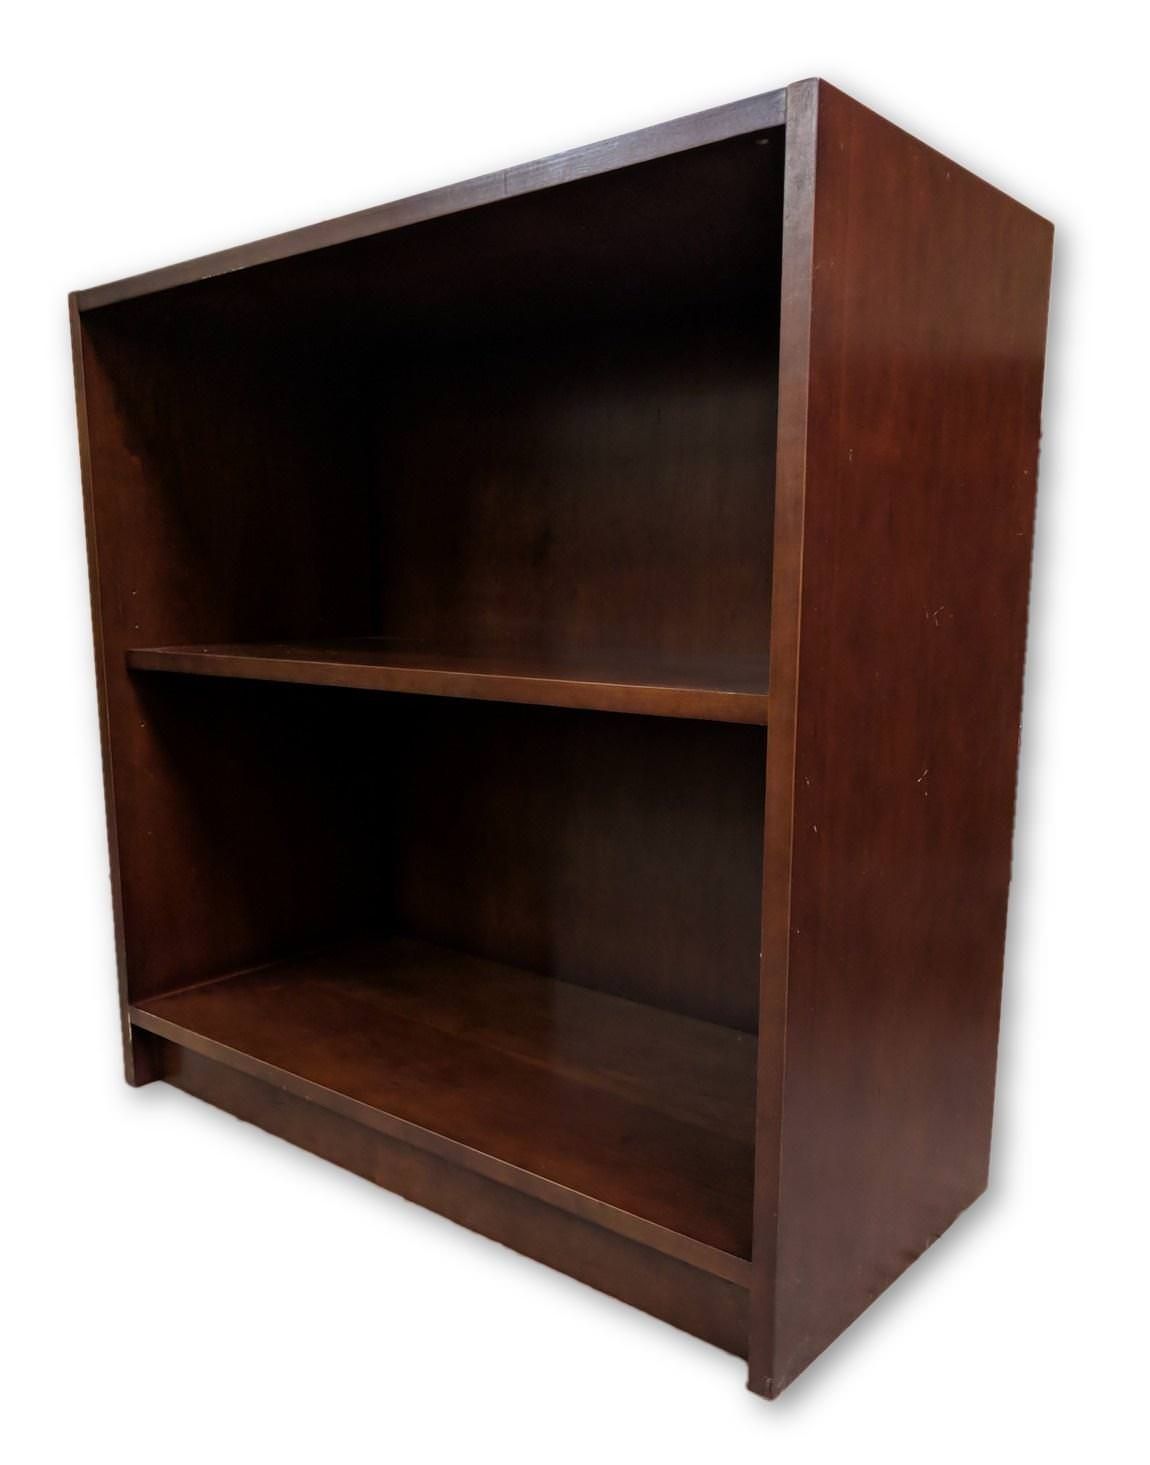 Cherry Solid Wood Bookshelf – 30 Inch Wide | Madison Liquidators With 30 Inch Bookcases (View 9 of 15)